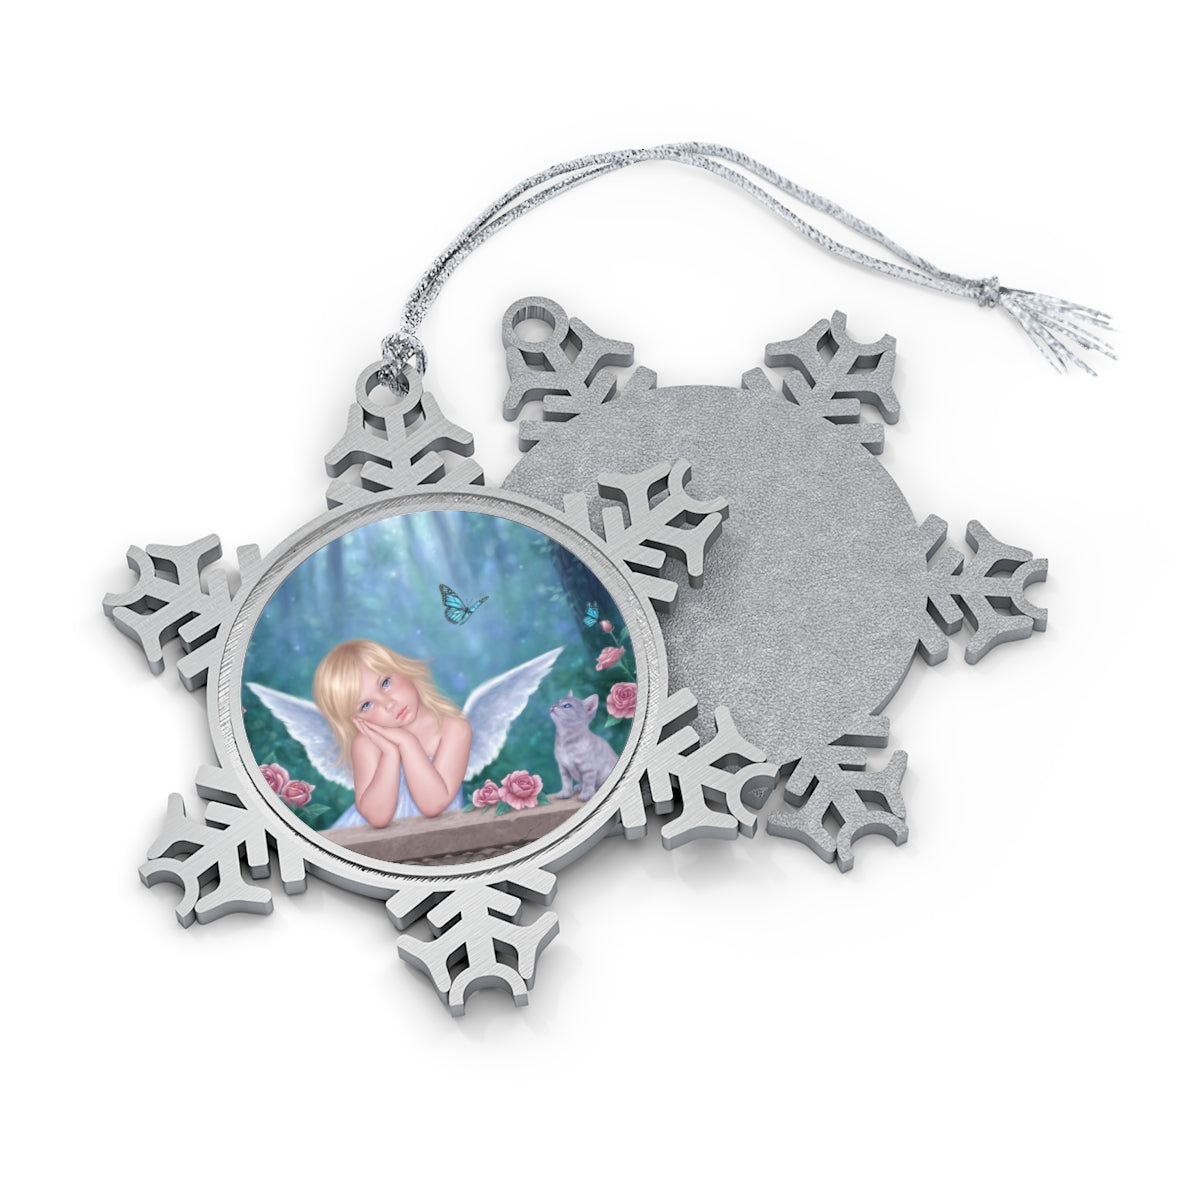 Snowflake Ornament - Little Miracles